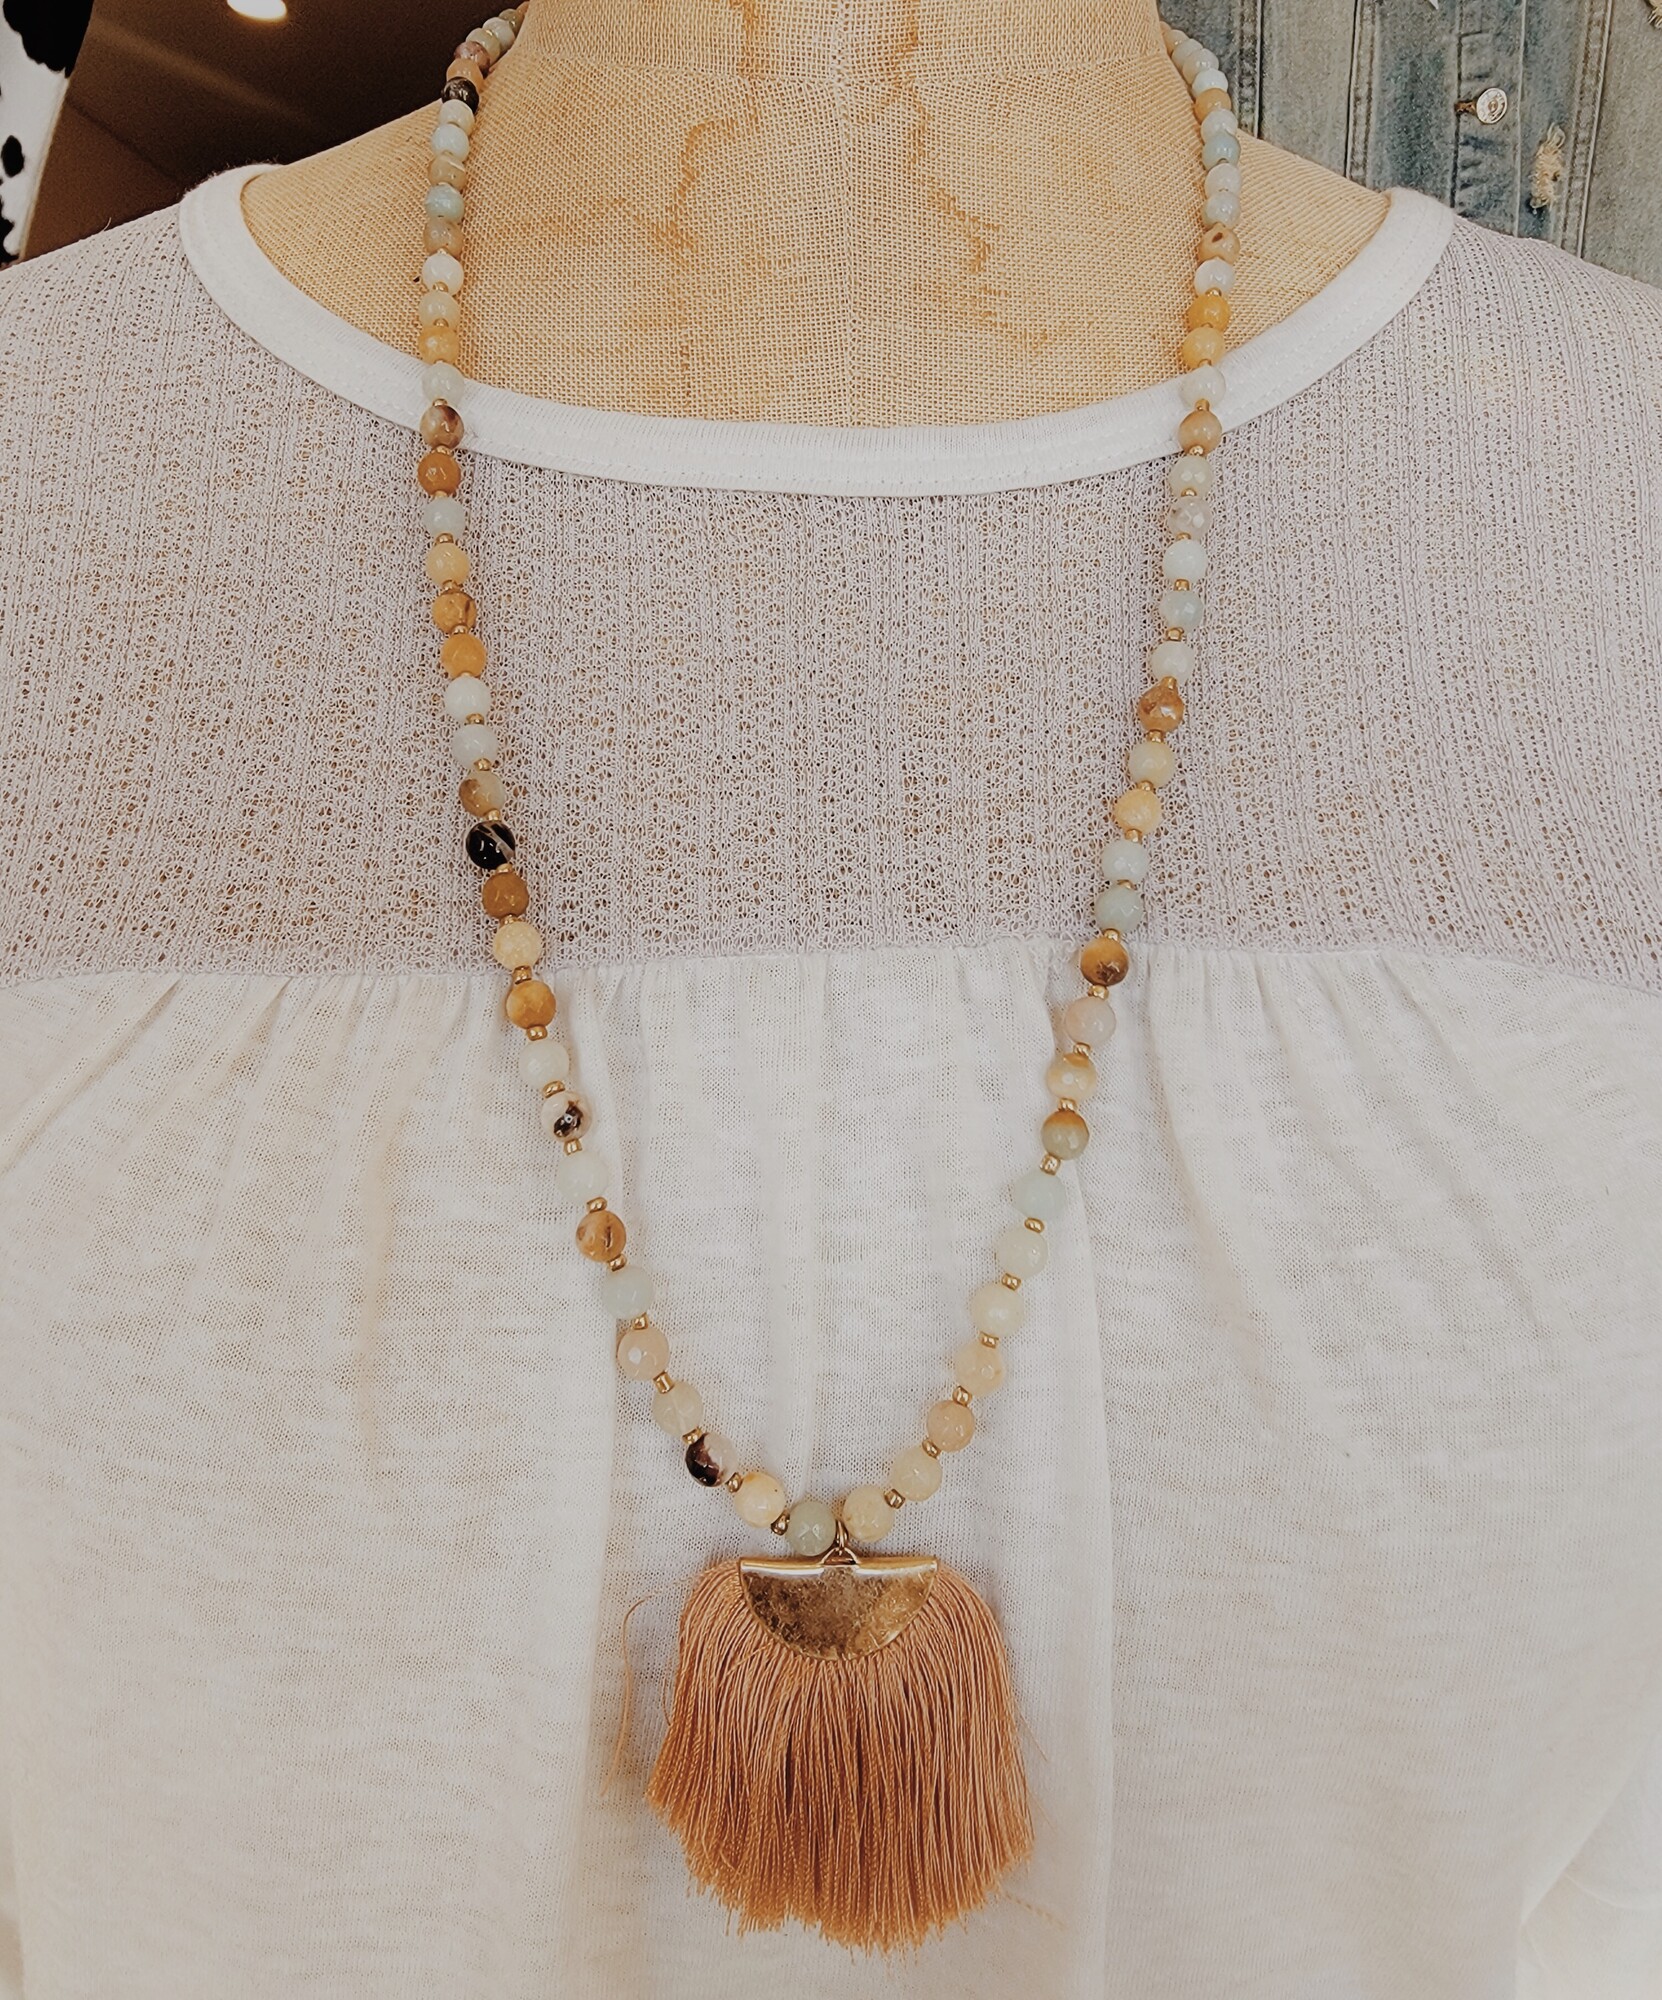 This adorable necklace is on a 28 inch beaded strand with a 3 inch extender!